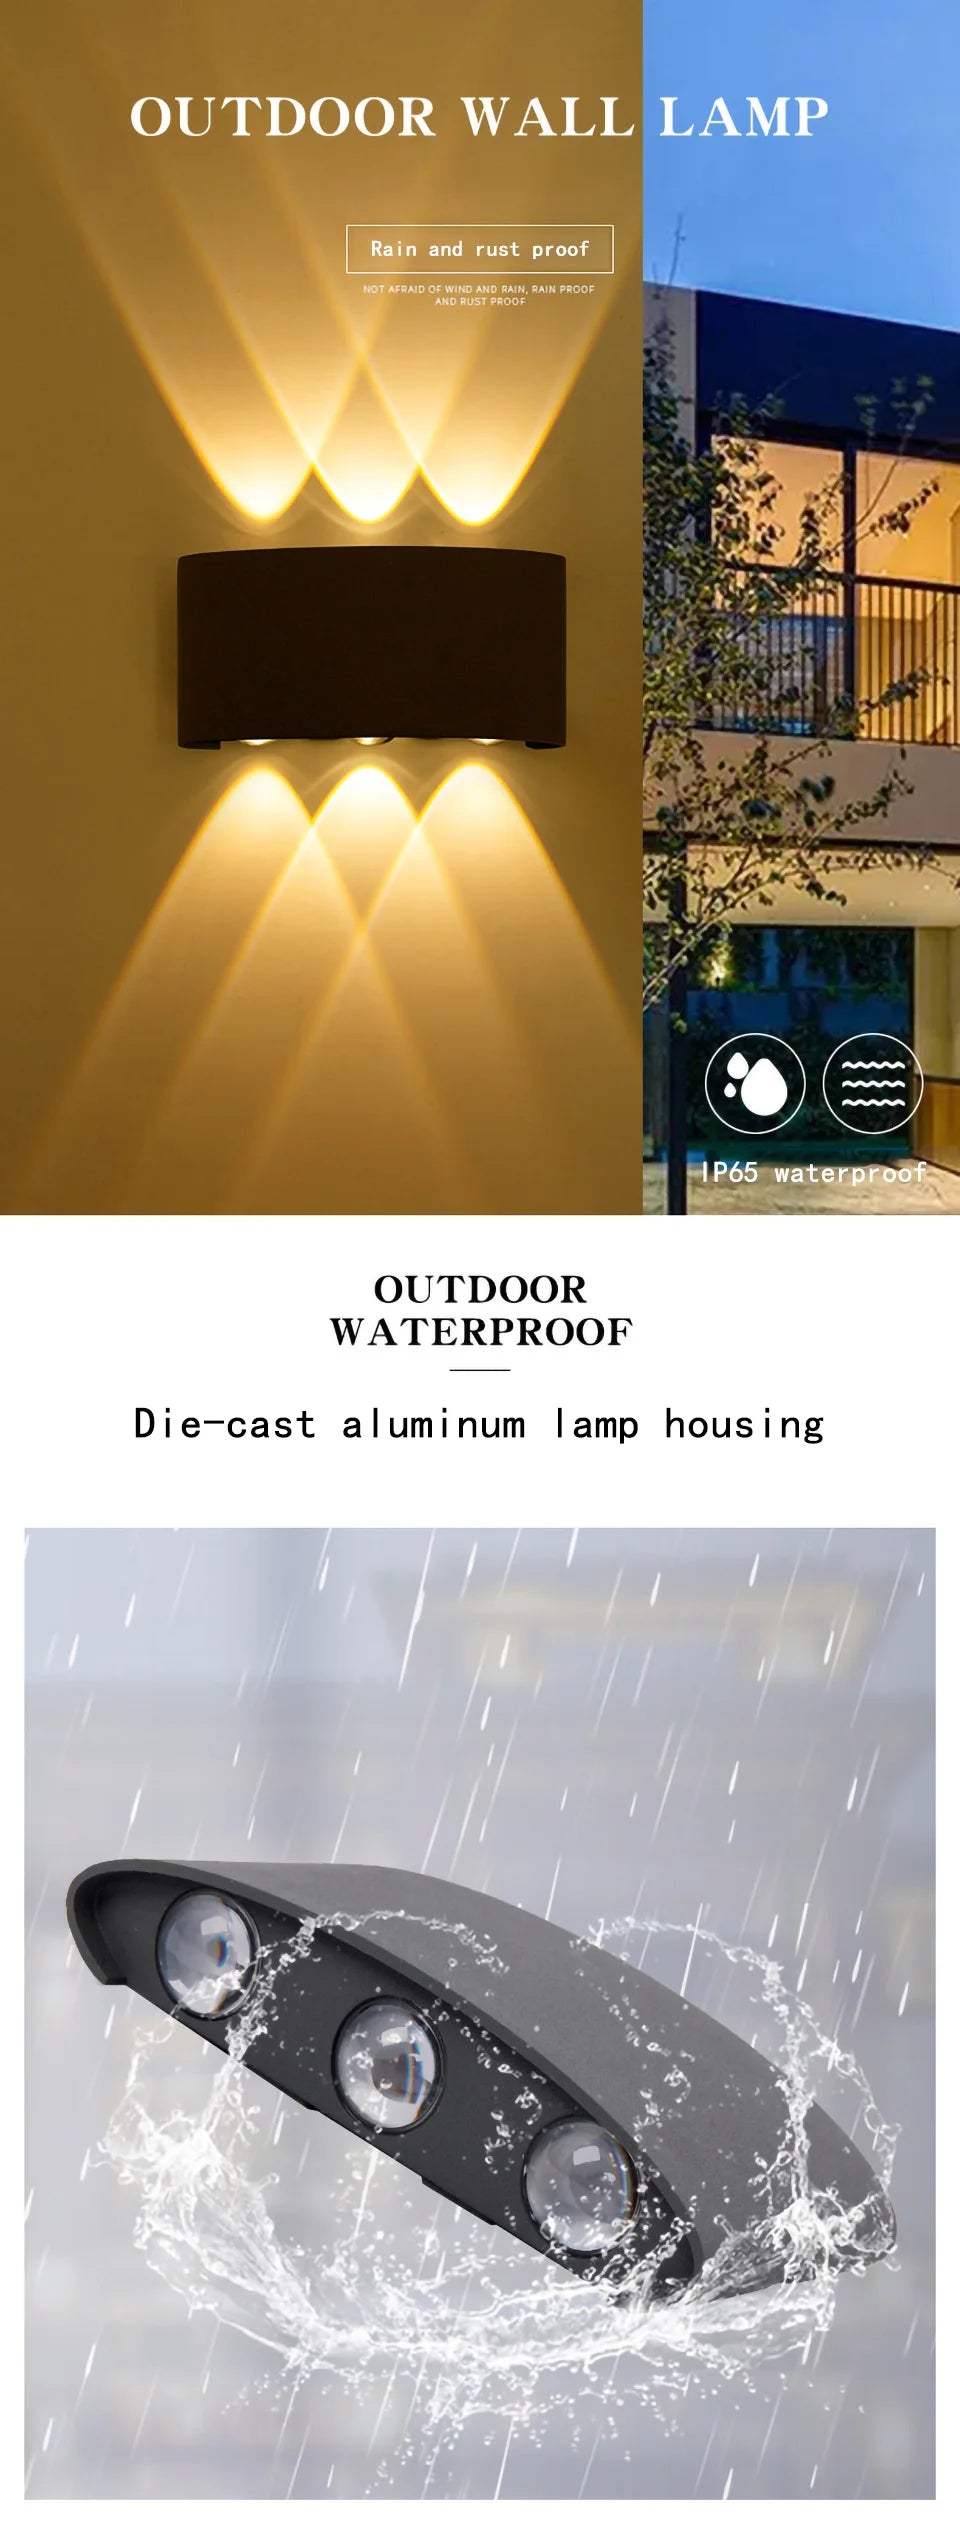 Durable outdoor wall lamp with IP65 waterproof rating, made of die-cast aluminum.